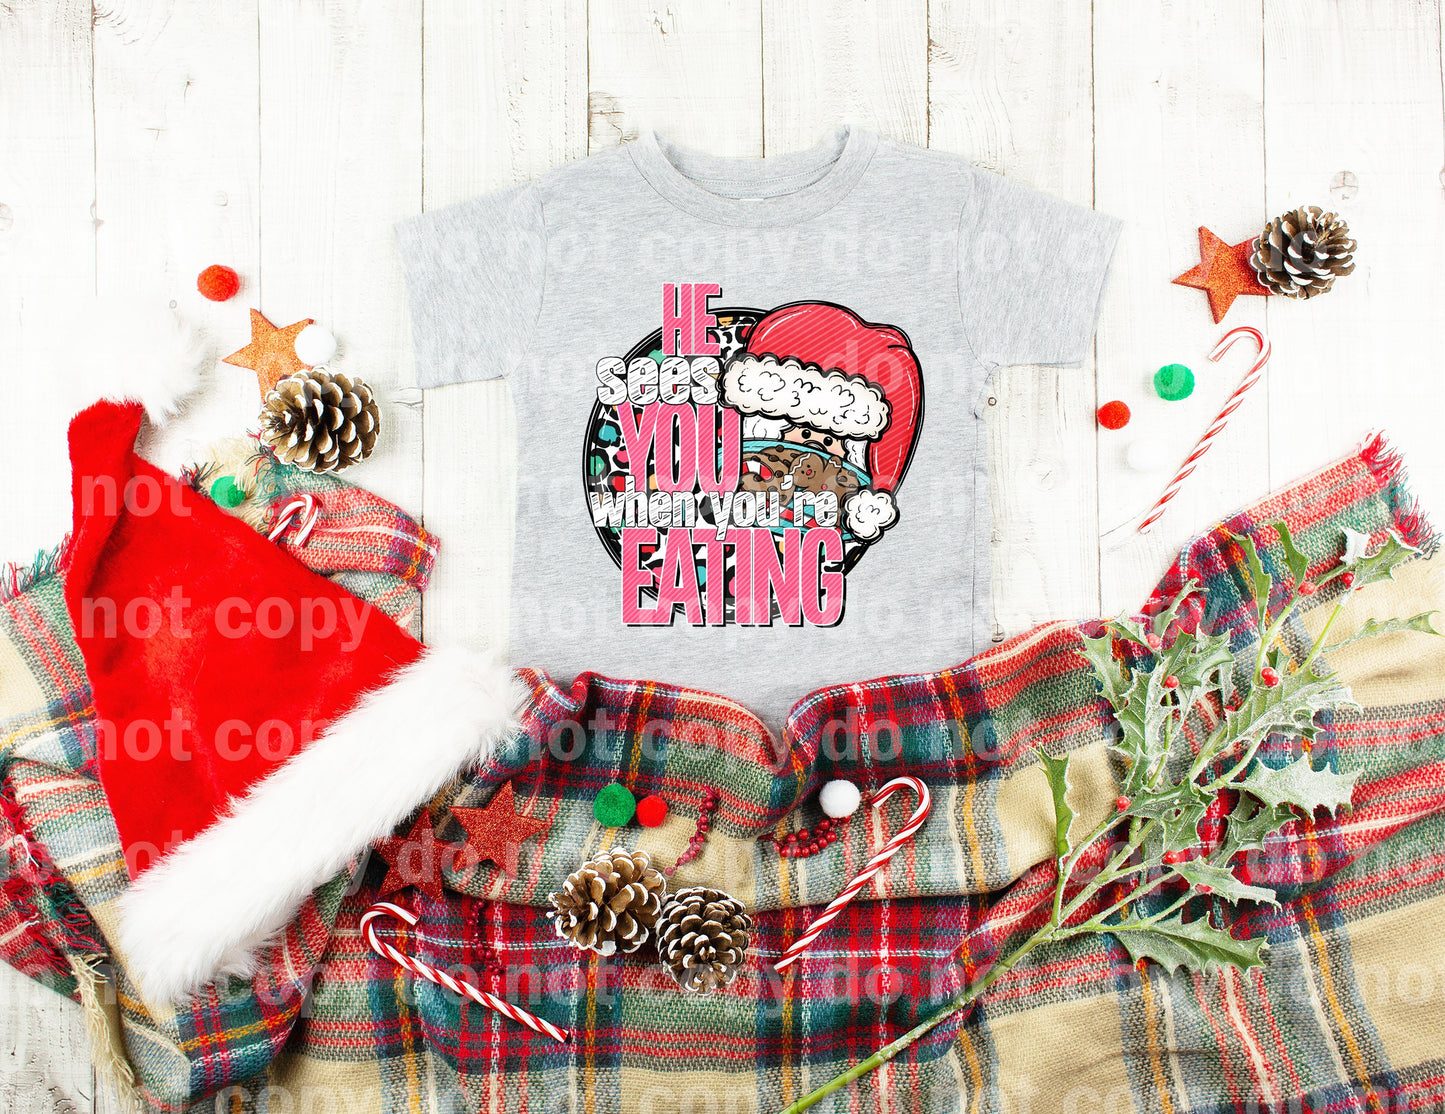 He Sees You When You're Eating Light Santa Dream Print or Sublimation Print